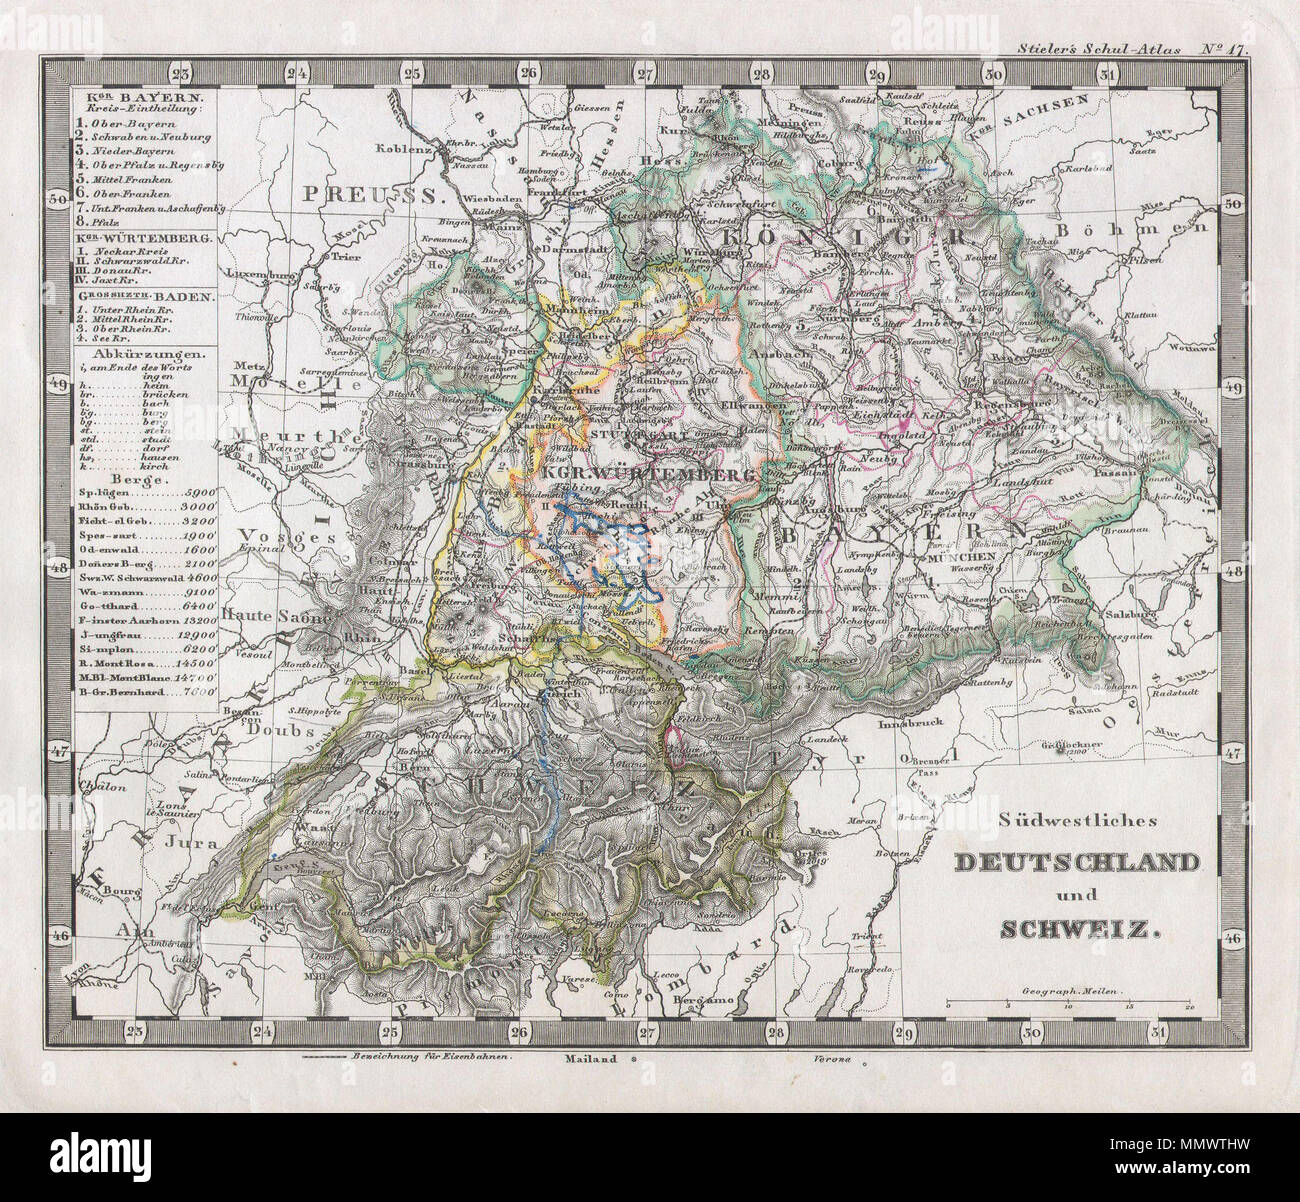 .  English: This fascinating 1862 map by Justus Perthes and Stieler depicts Switzerland and the states of southwestern Germany. Unlike other cartographic publishers of the period, the Justus Perthes firm, did not transition to lithographic printing techniques until the early 1870s. Instead, all of his maps are copper plate engravings and hence offer a level of character and depth of detail that was impossible to find in lithography or wax-process engraving. All text in German. Issued in the 1862 edition of Stieler’s Schul-Atlas.  Sudwestliches Deutschland und Schweiz.. 1862. 1862 Stieler Map o Stock Photo